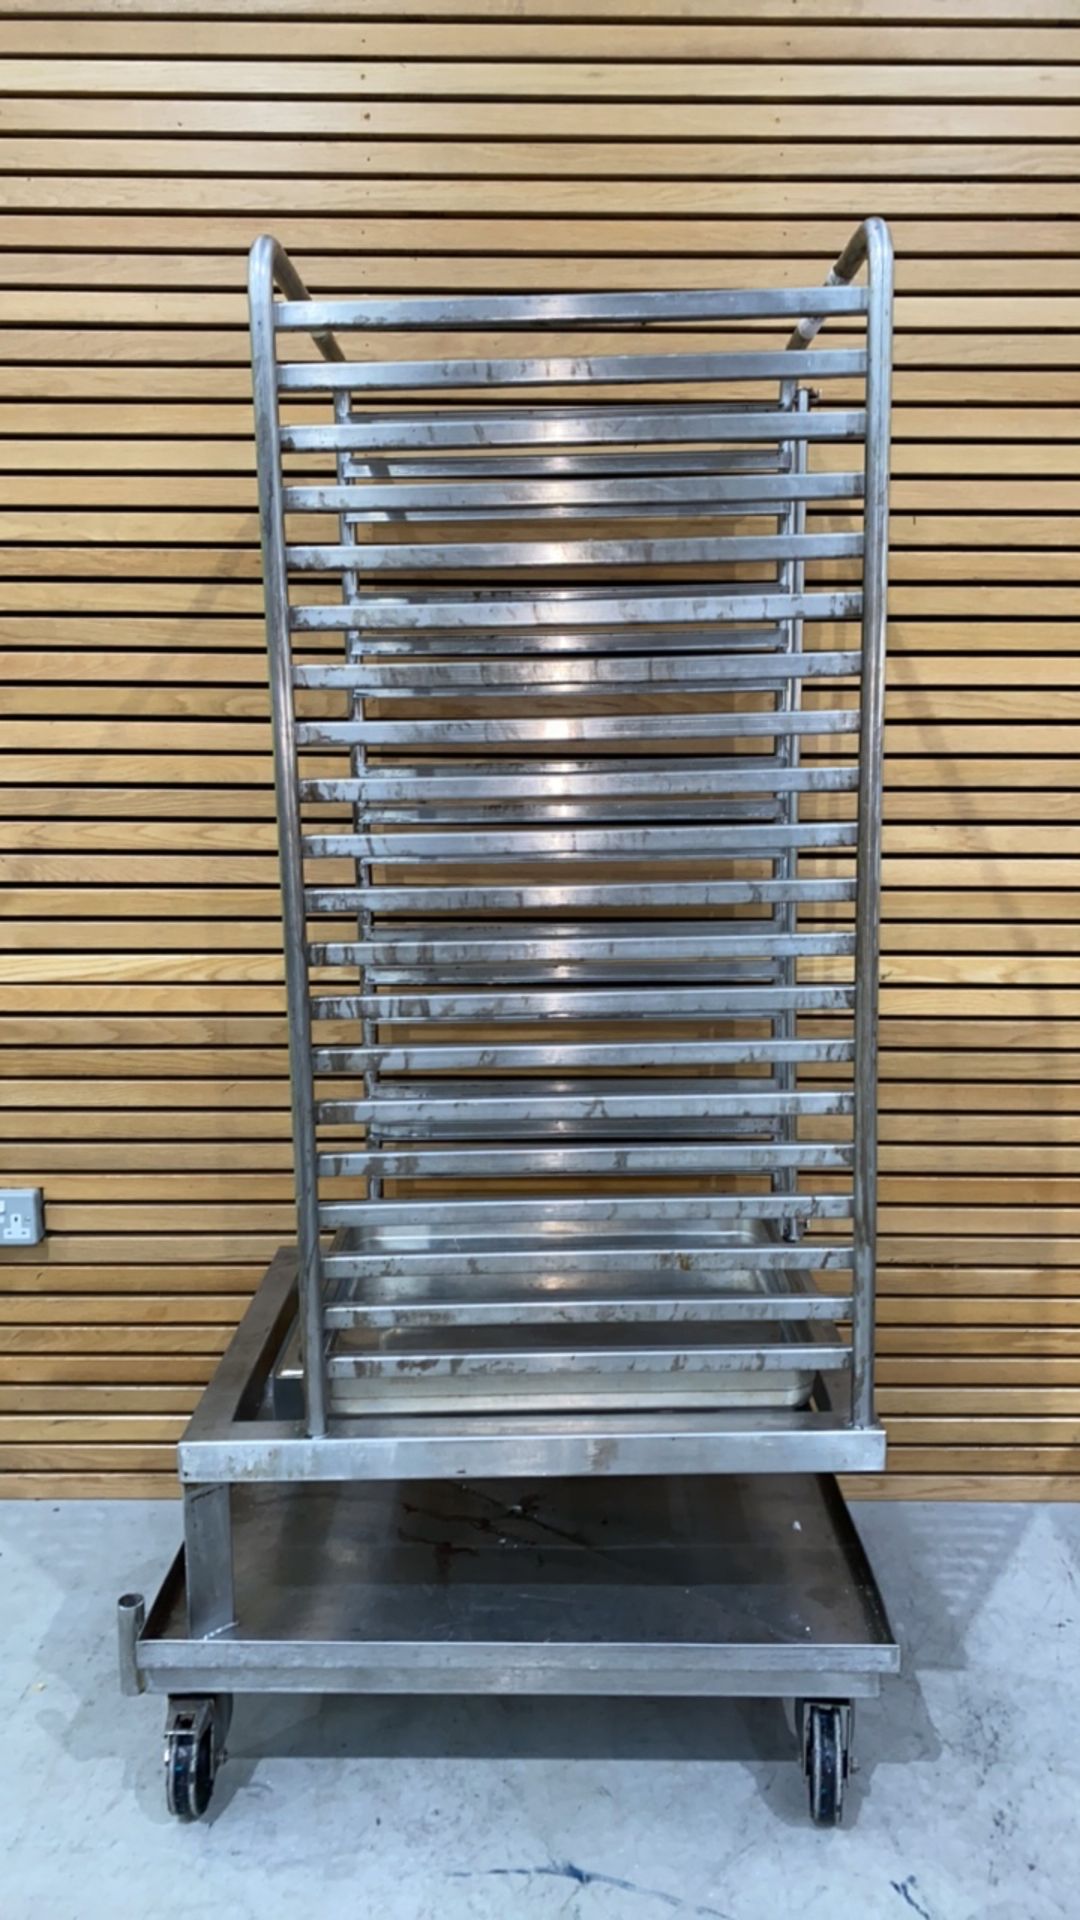 Rational Mobile Oven Rack 20 2/1 for Rational Oven - Image 2 of 5